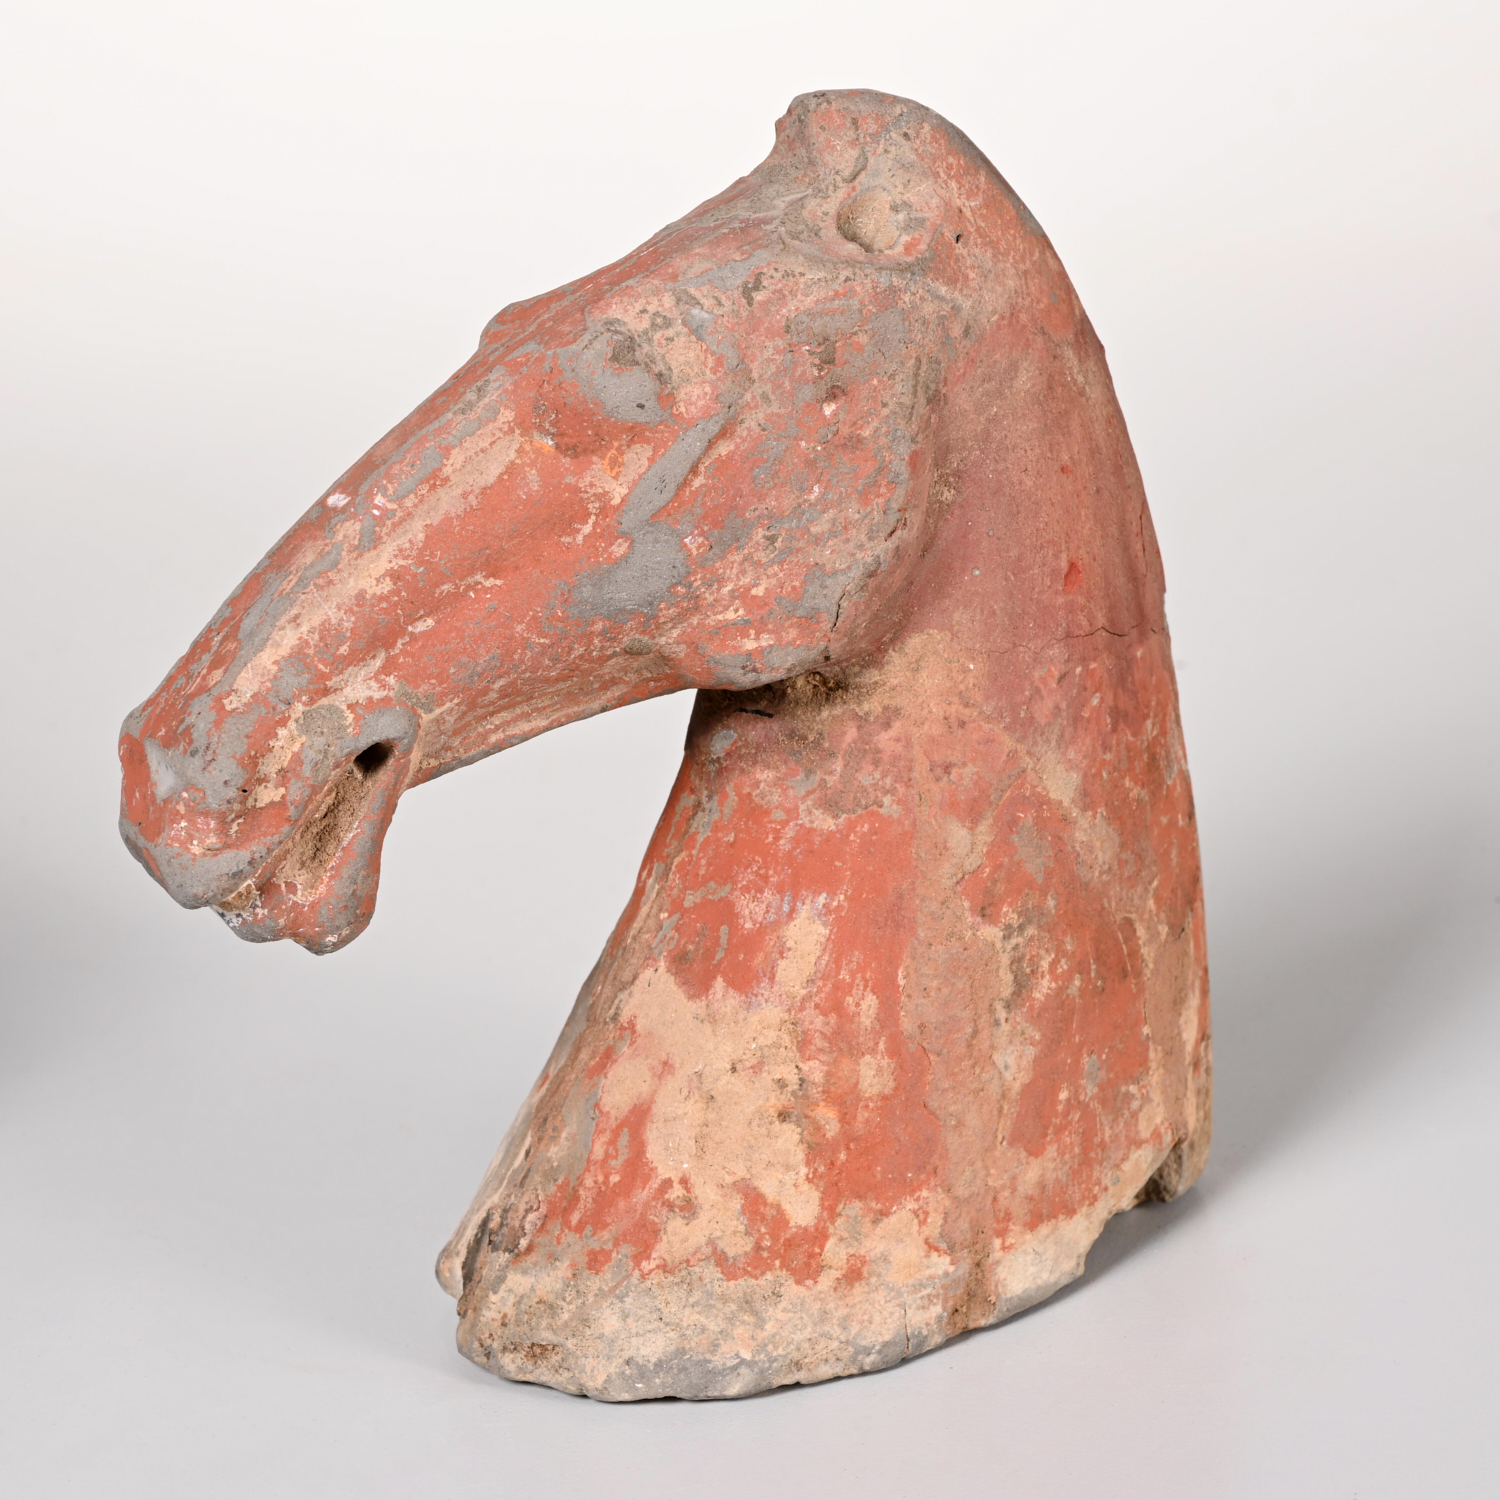 CHINESE TERRACOTTA TANG HORSE HEAD 2ce12d